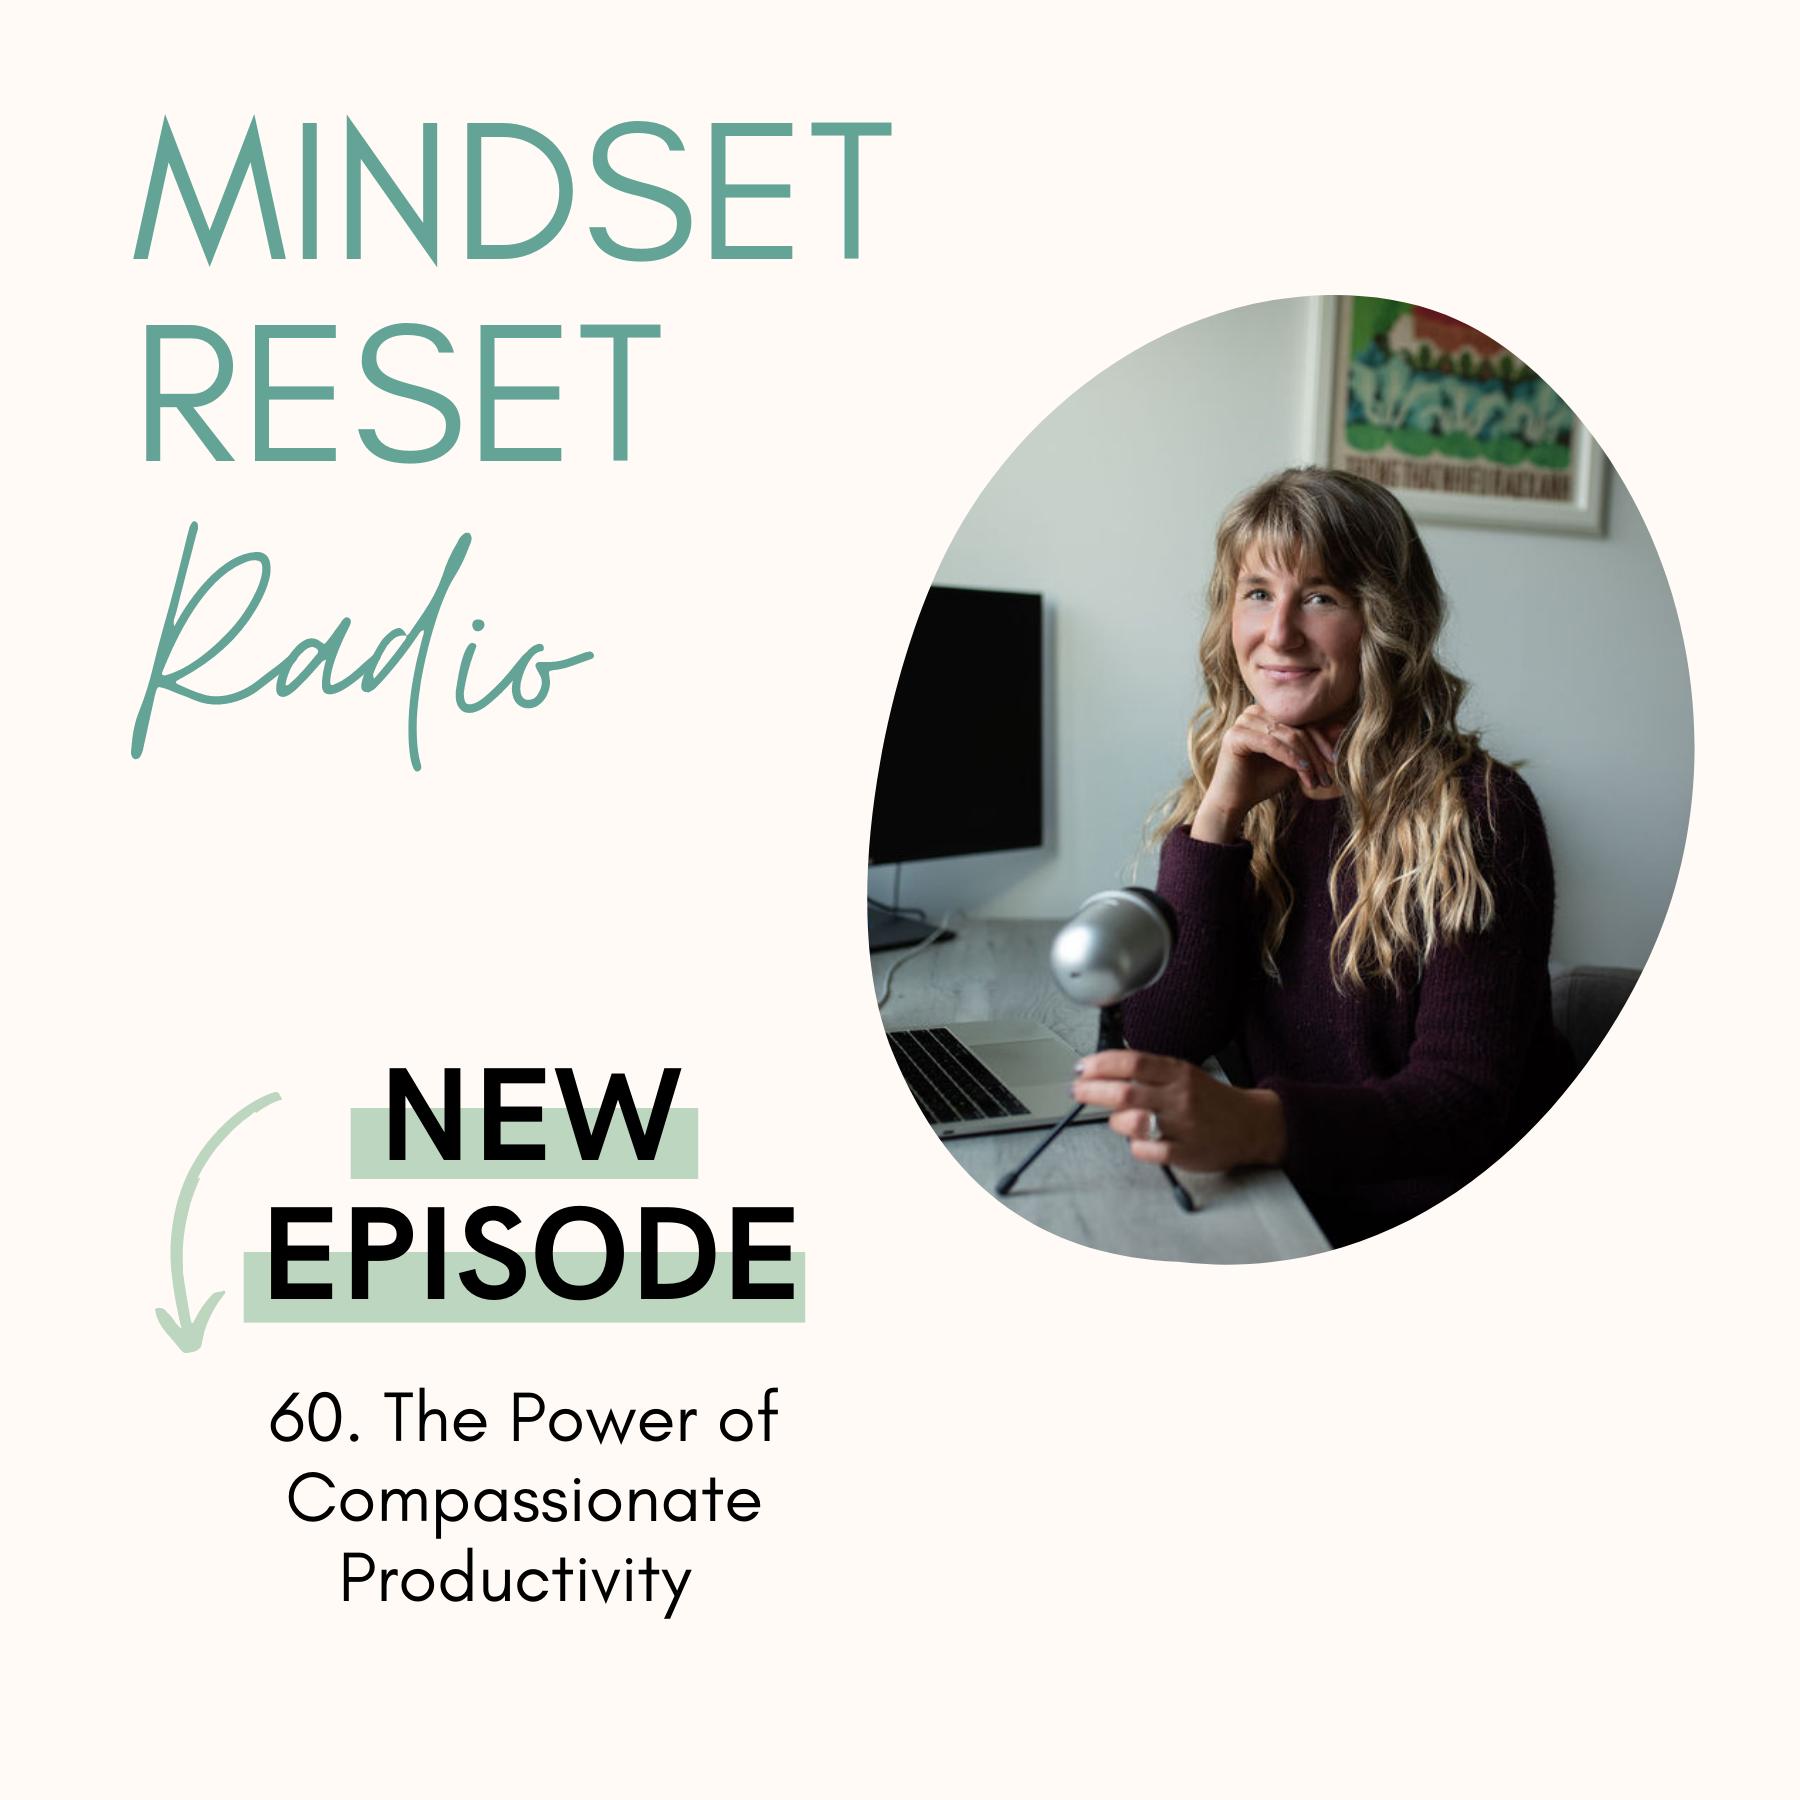 60. Let's chat about the power of compassionate productivity